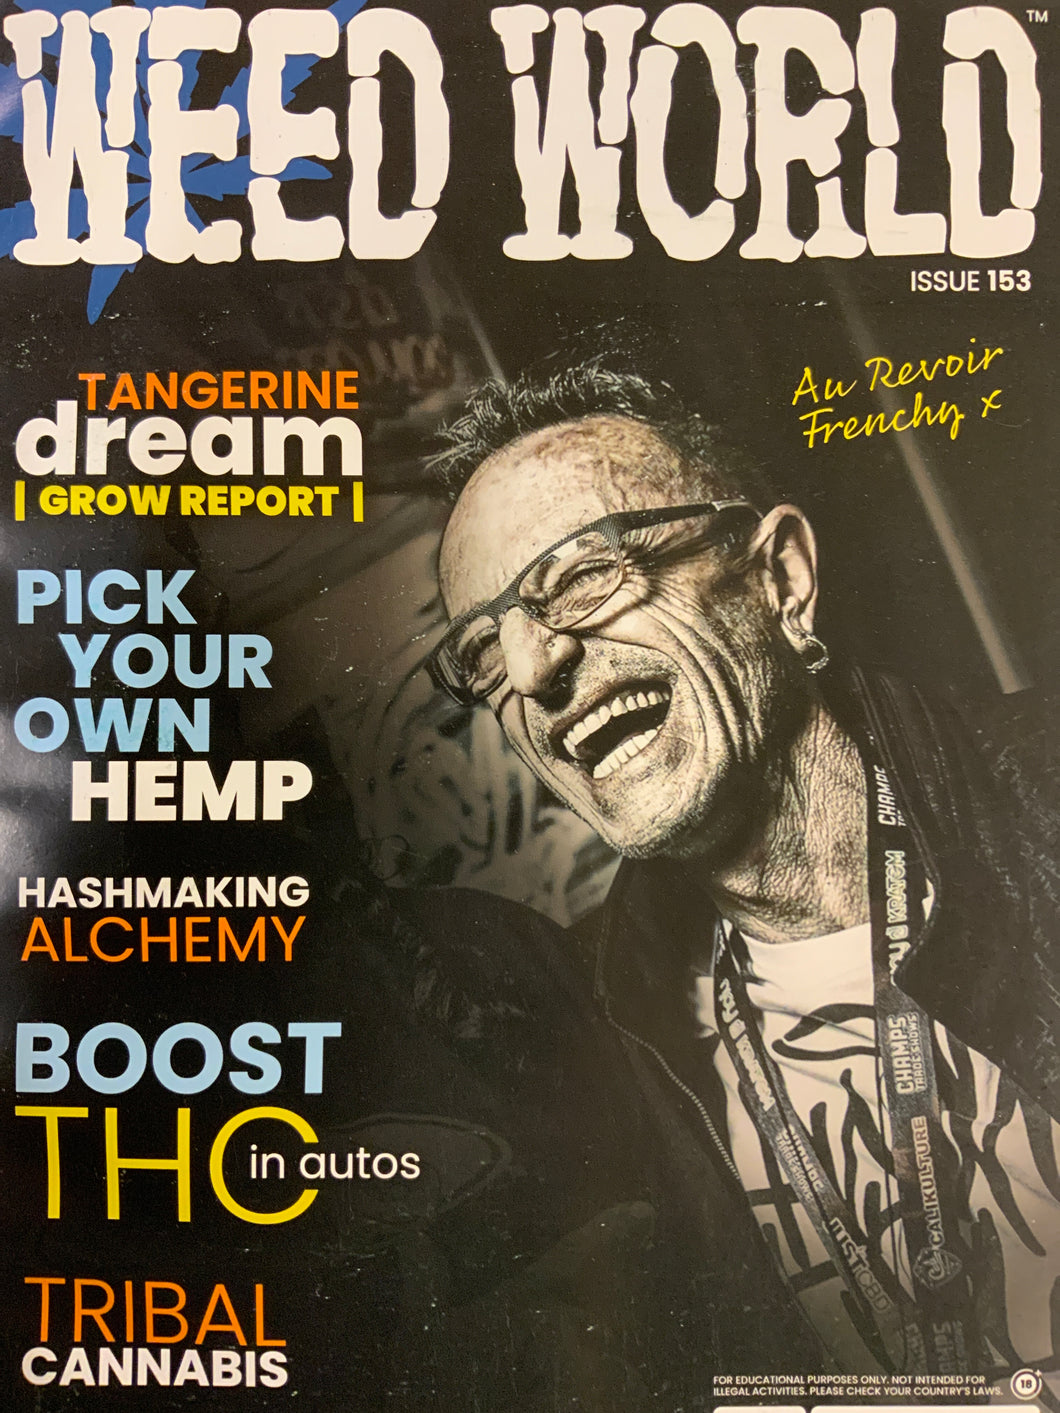 Weed World Issue 153